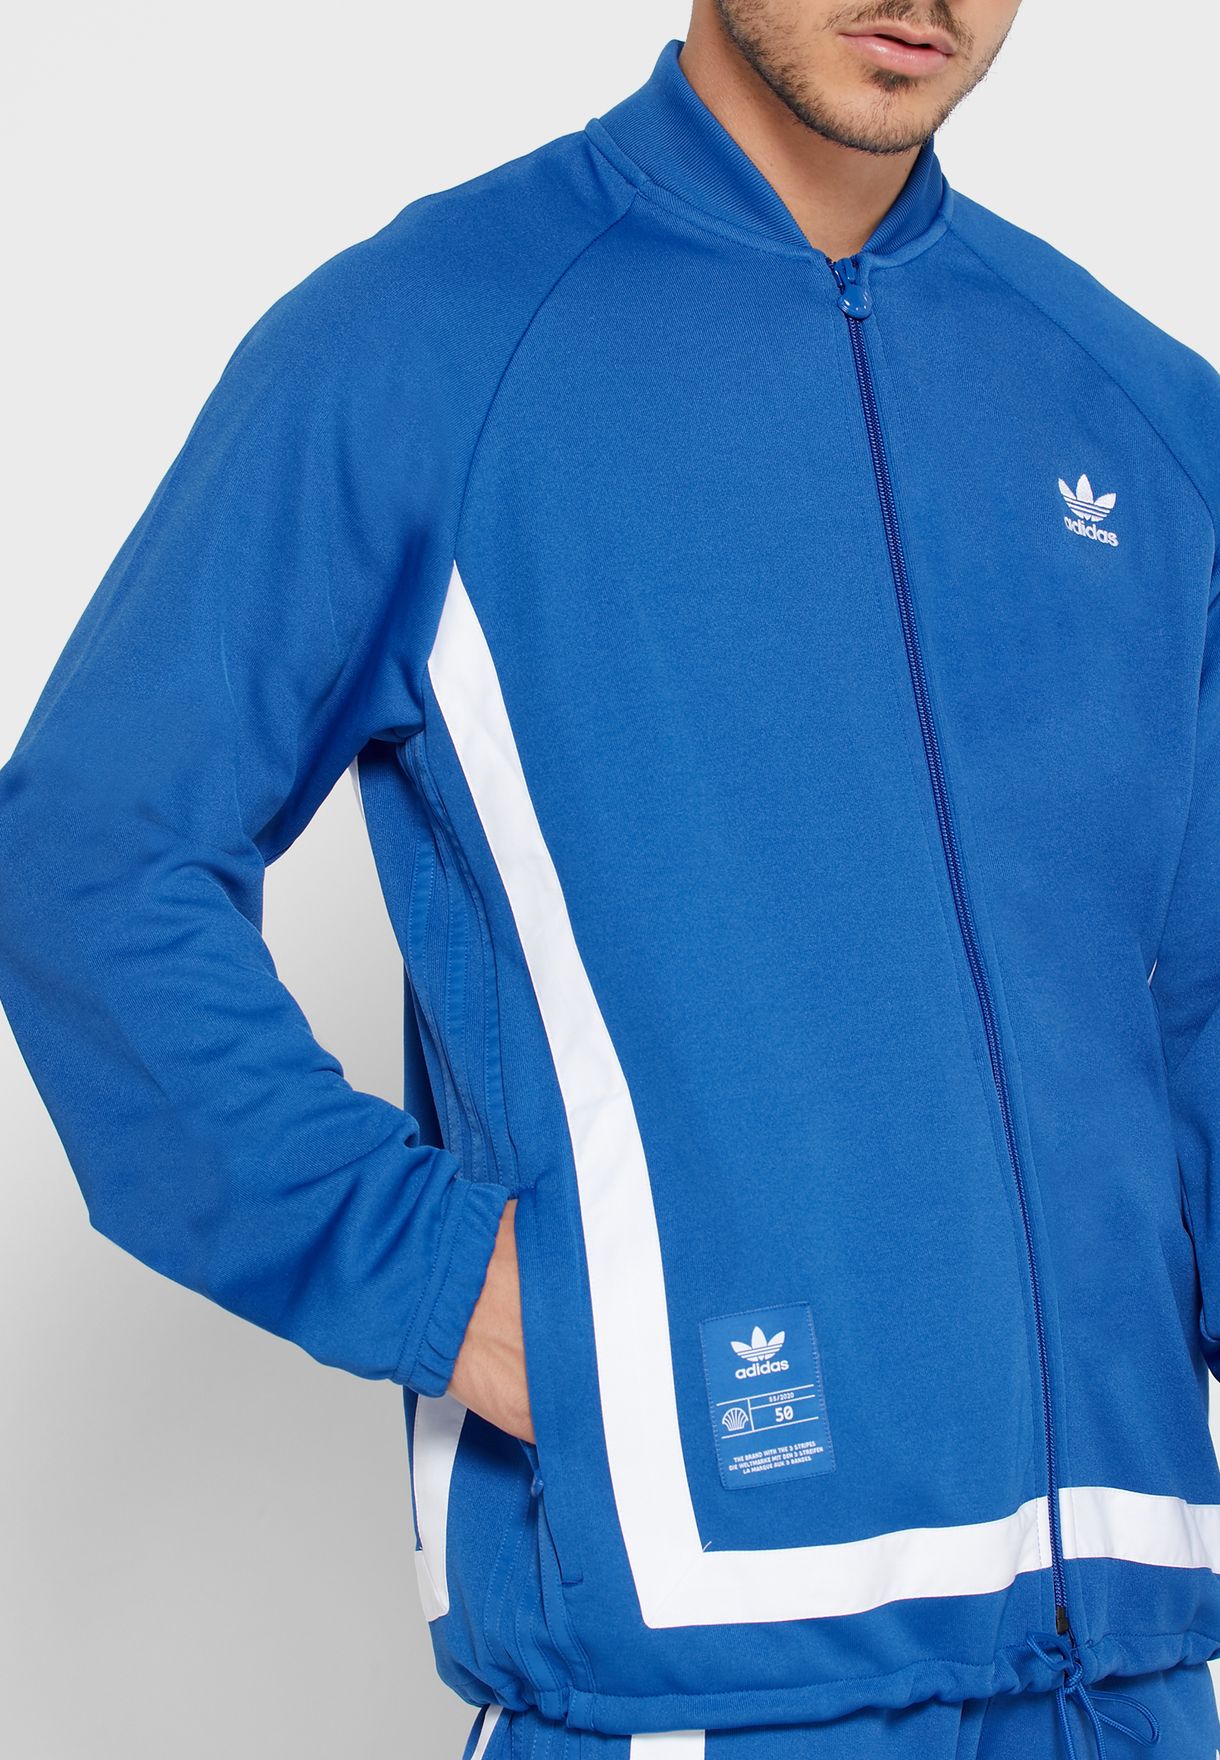 adidas warm up suits